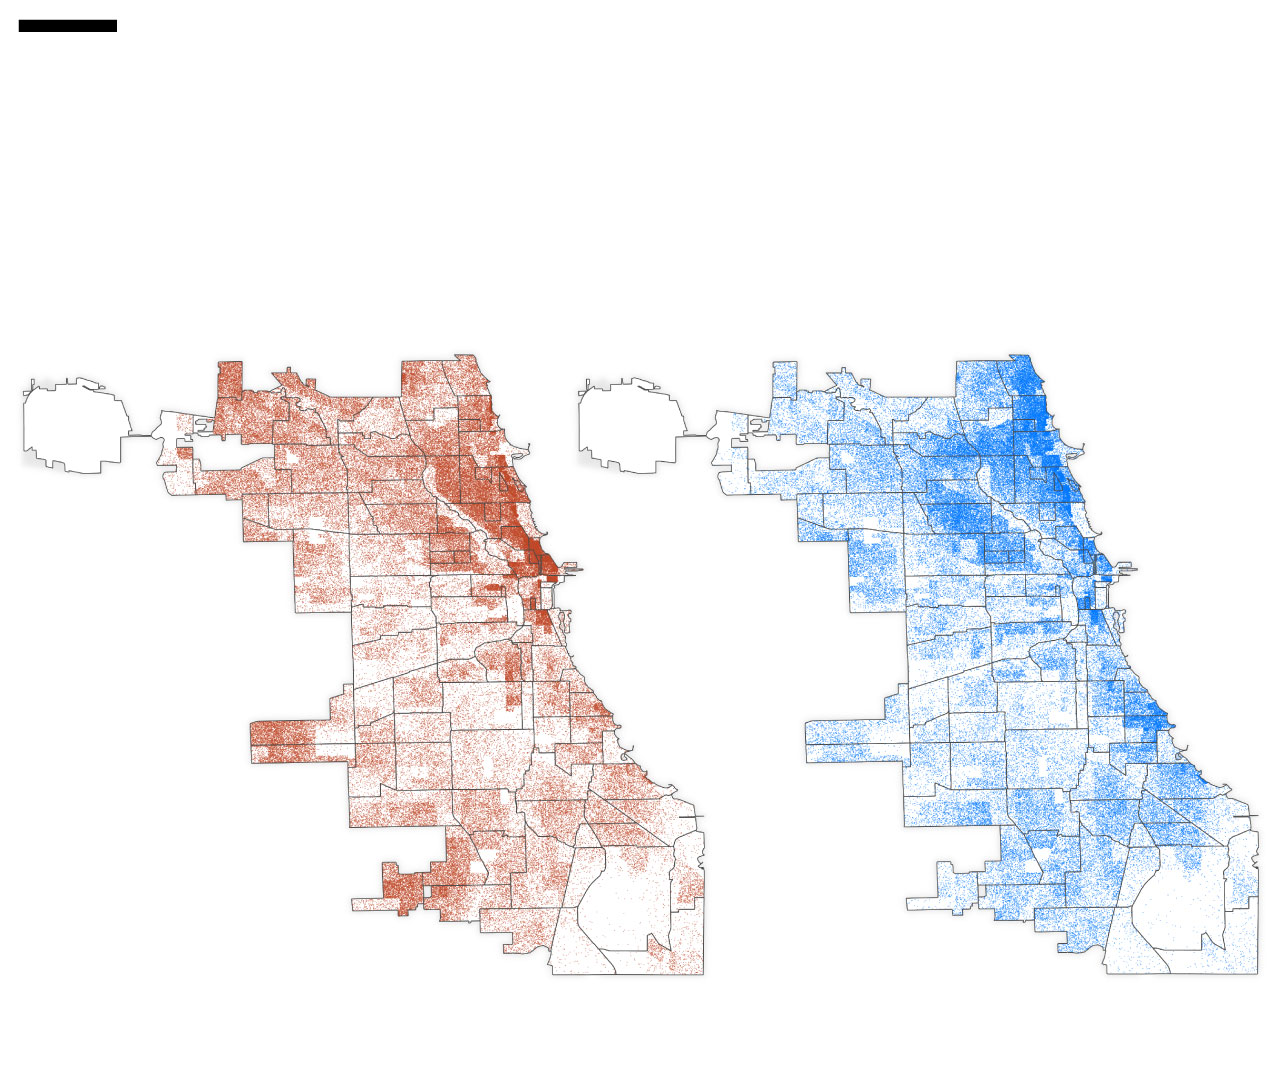 Dot density maps of Chicago showing voters against and for the Bring Home Chicago referendum.